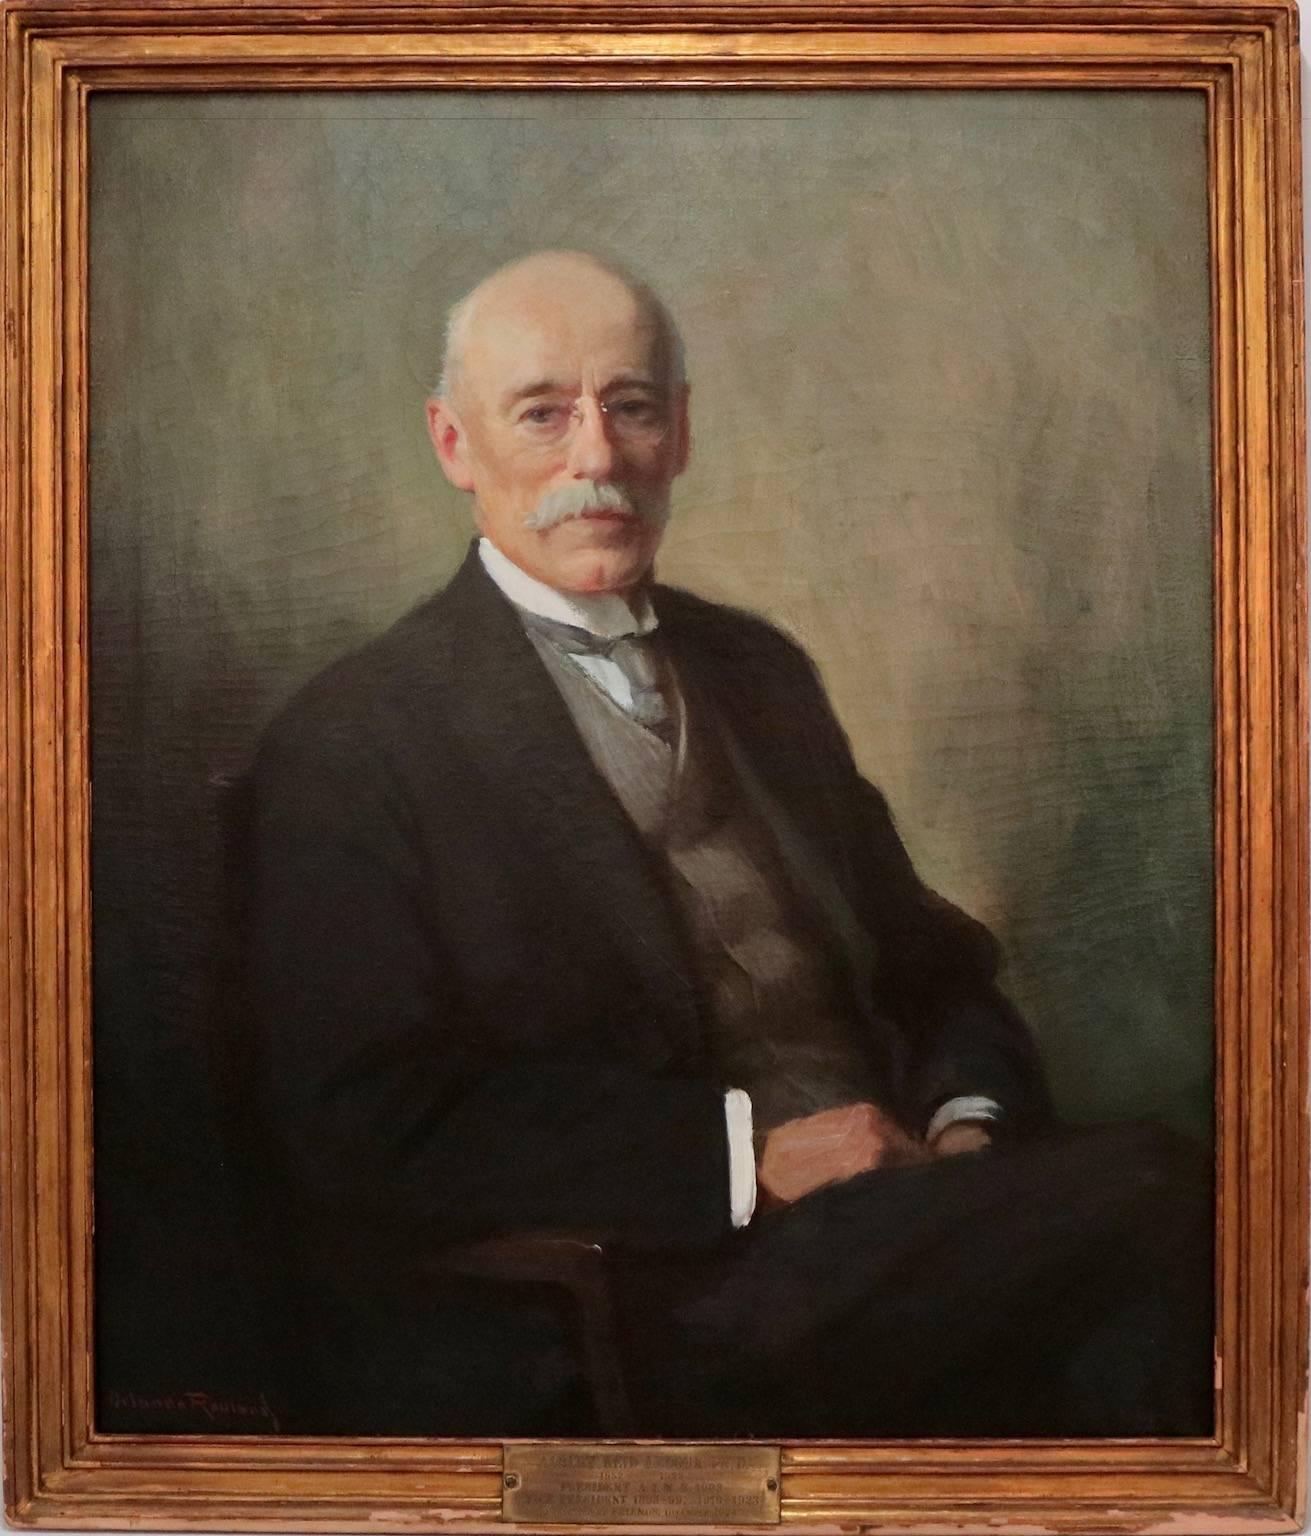 Oil on canvas portrait of philanthropist Dr. Albert Reid Leoux. Size with frame 40 in (102 cm) x 34 in (86.5 cm) x 2 in (5 cm).

Born in Illinois, Orlando Rouland became a painter of rural landscapes, scenes of New York City, and portraits of